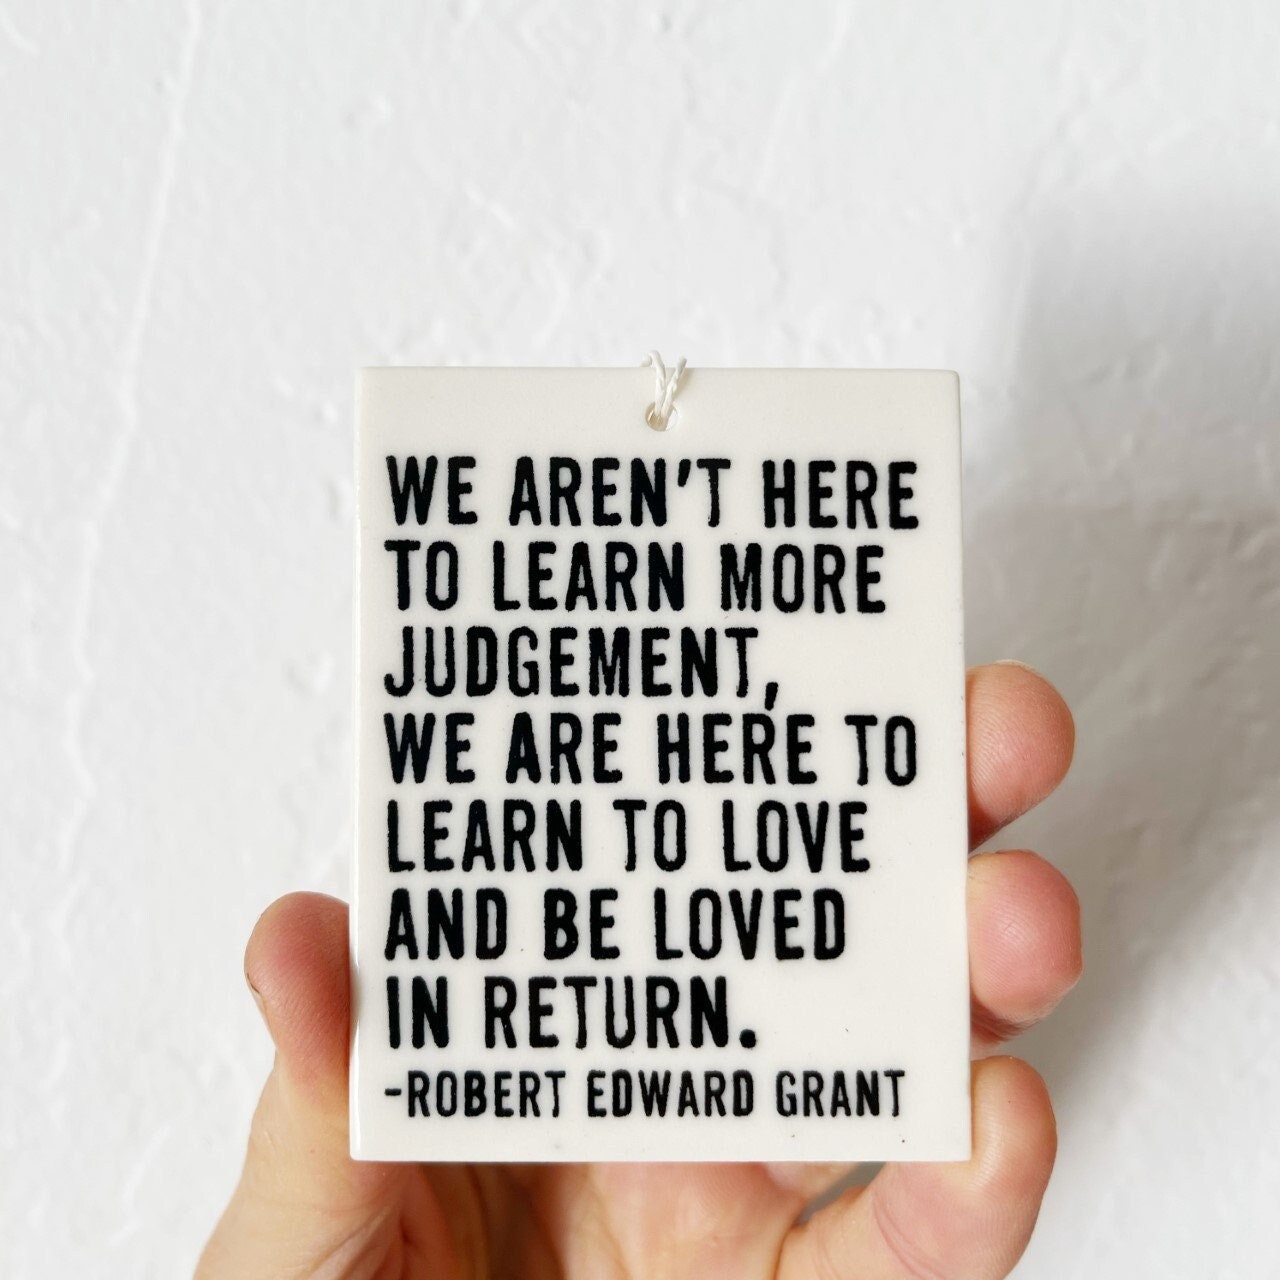 robert edward grant | ceramic wall tag | ceramic wall art | parenting | new parent | love each other | daily reminder | judgement